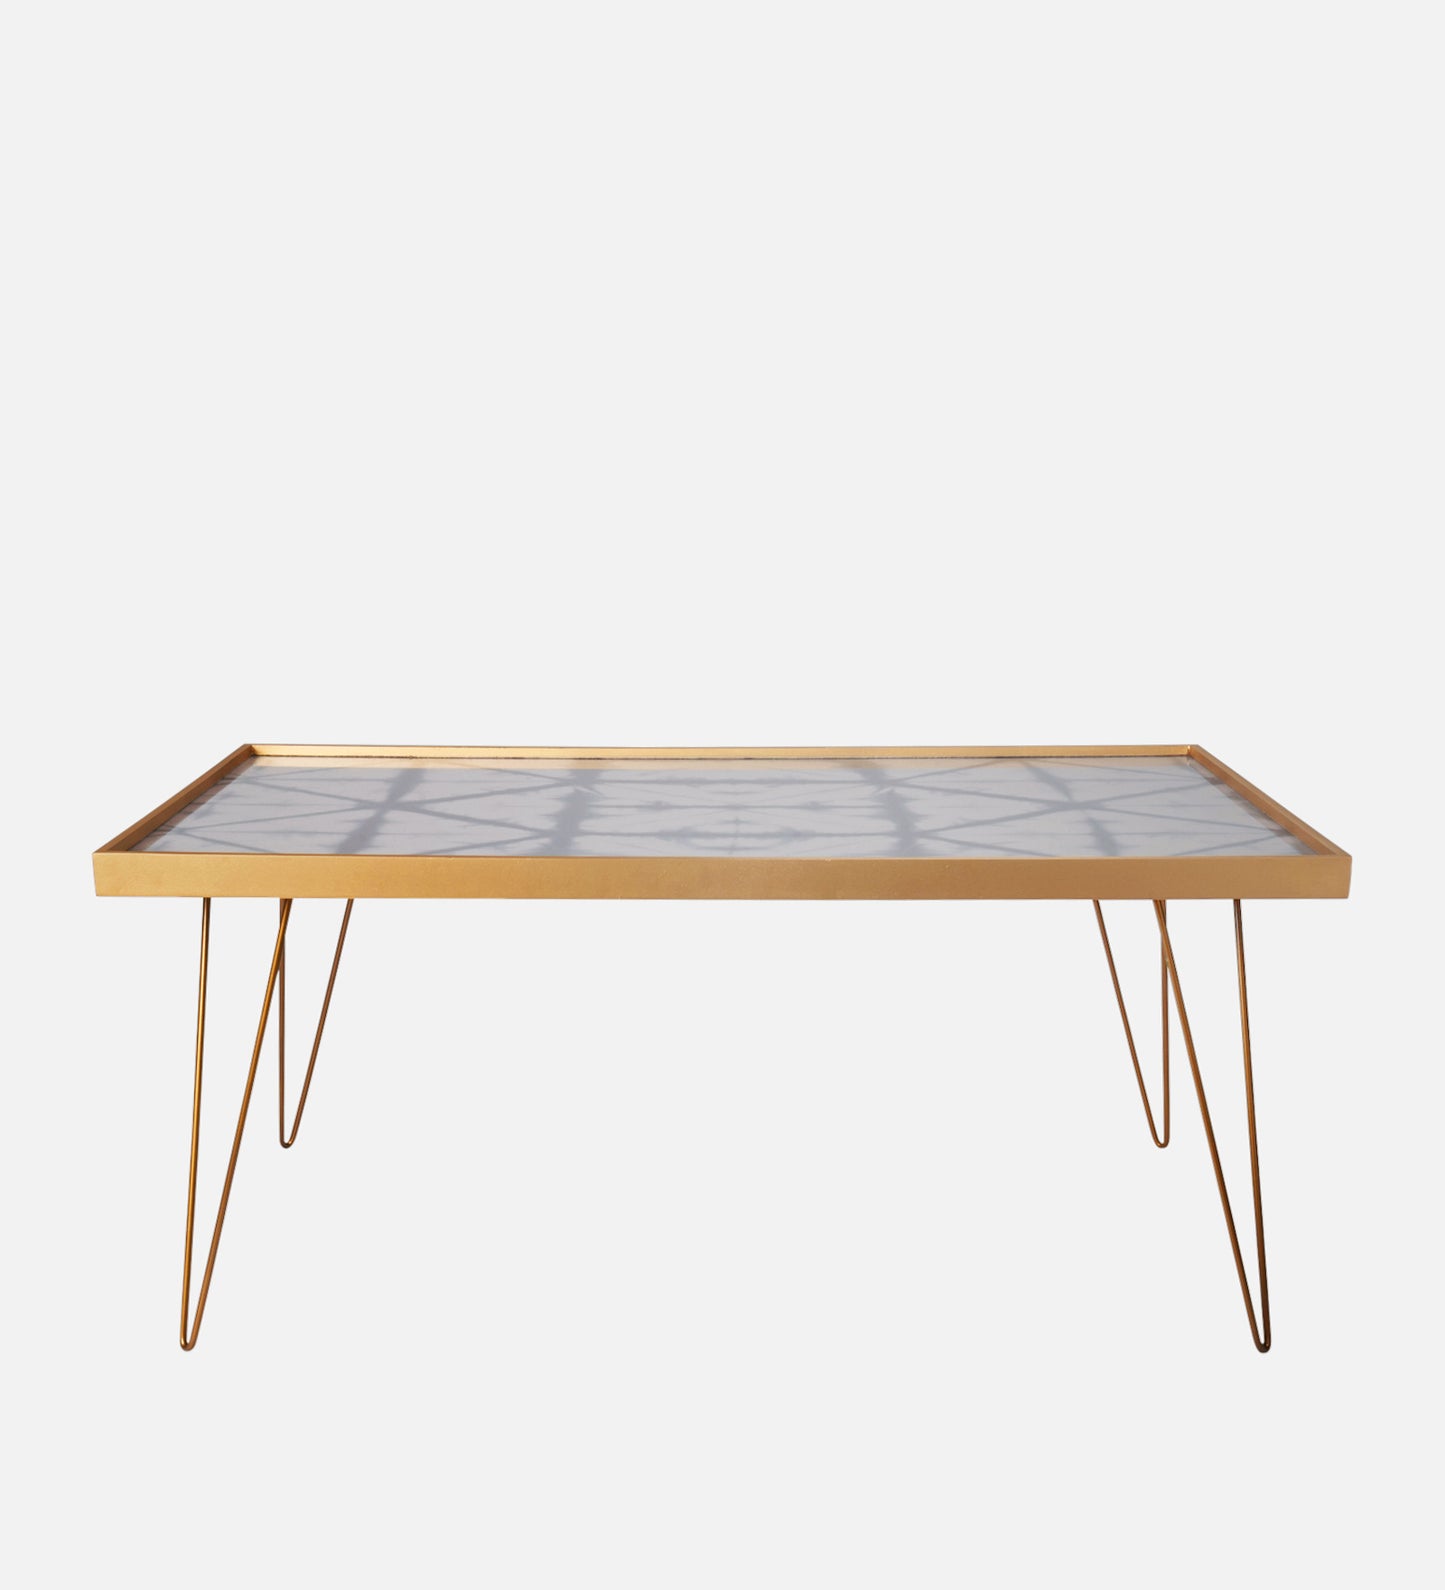 Patang Rectangle Coffee Tables, Wooden Tables, Coffee Tables, Center Tables, Living Room Decor by A Tiny Mistake